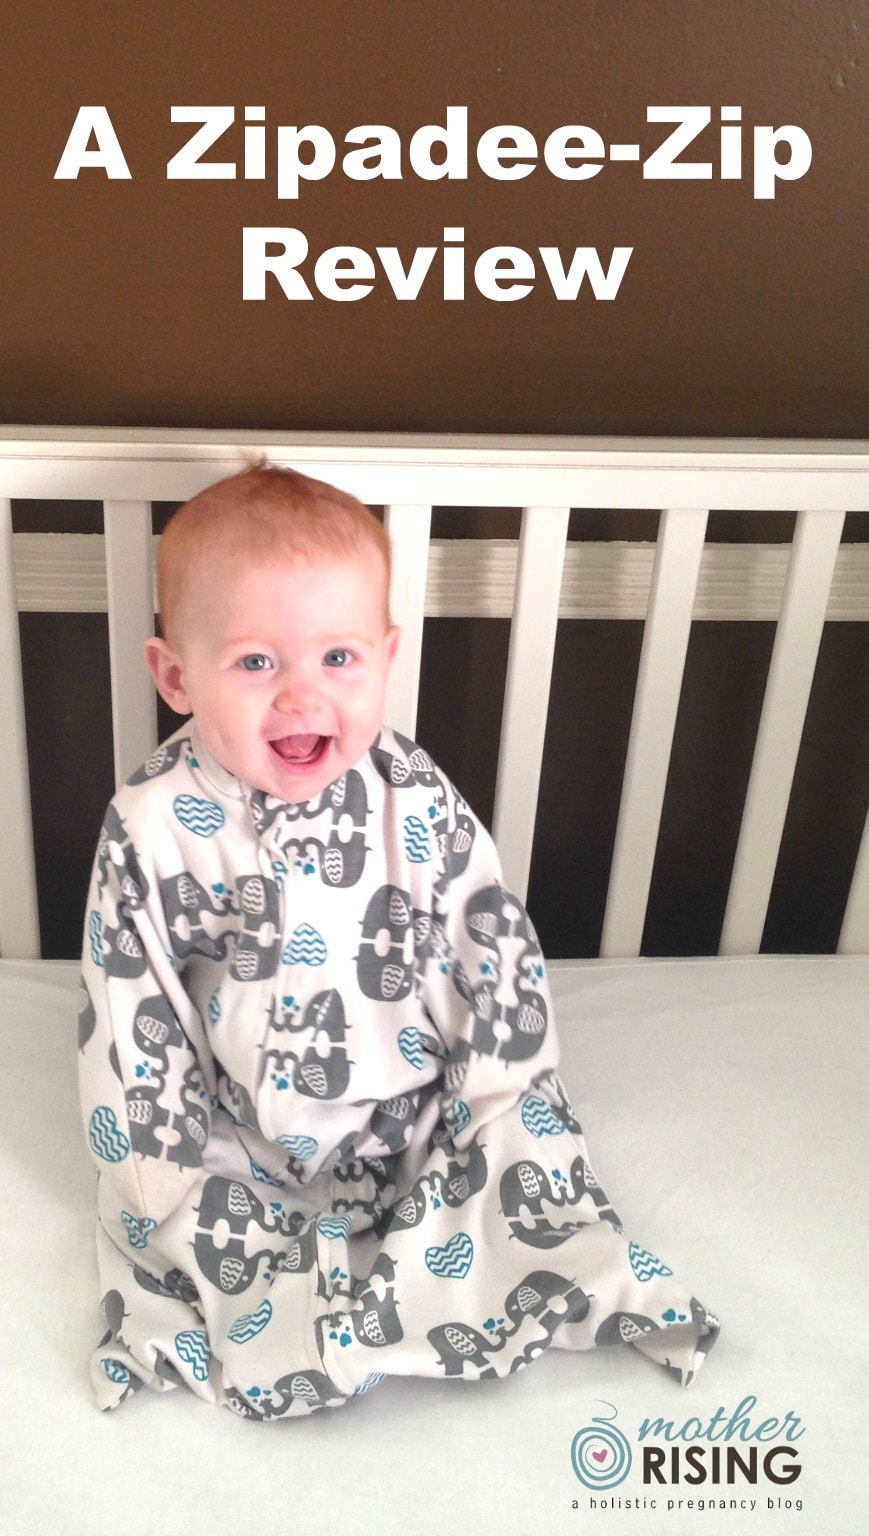 In this Zipadee-Zip Review I compare the Zipadee-Zip to the Baby Merlin's Magic Sleepsuit. Both products are designed to transition a baby out of a swaddle blanket. 